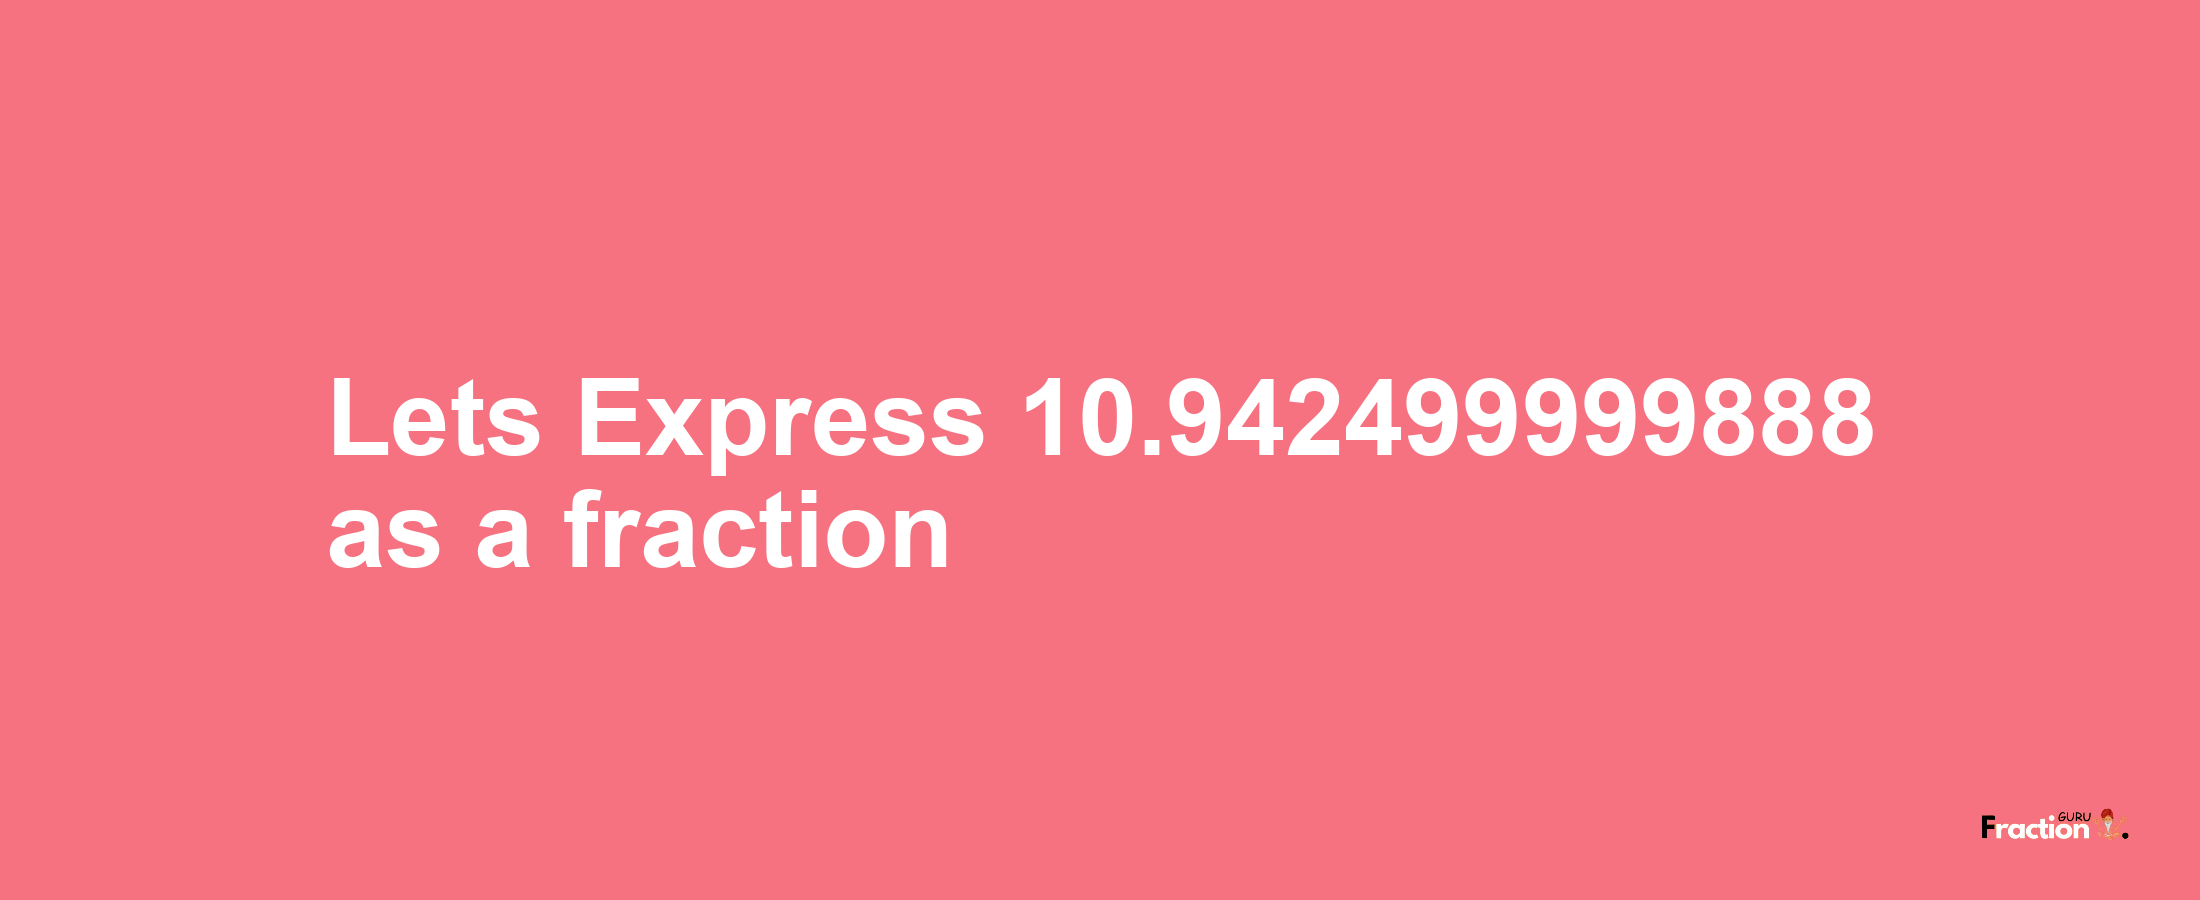 Lets Express 10.942499999888 as afraction